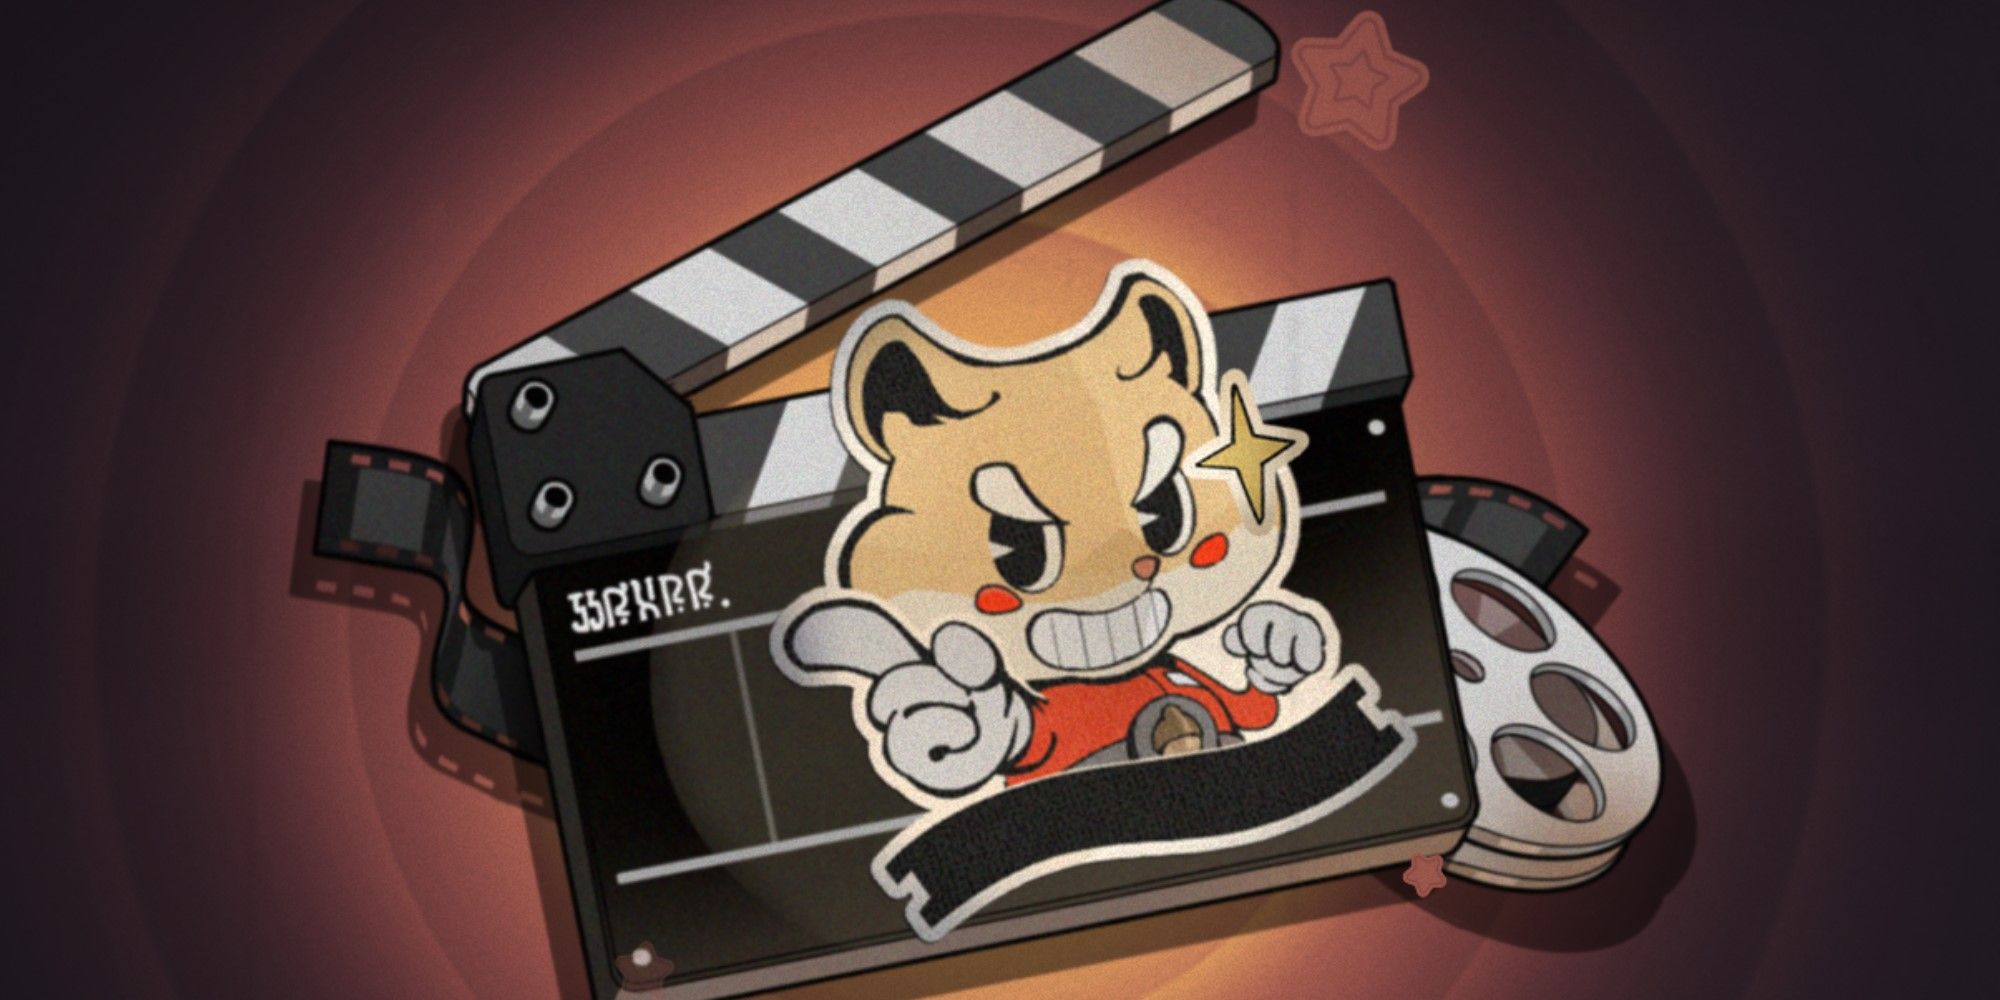 A hamster grins before a director's slate and a reel of film in Honkai Star Rail.